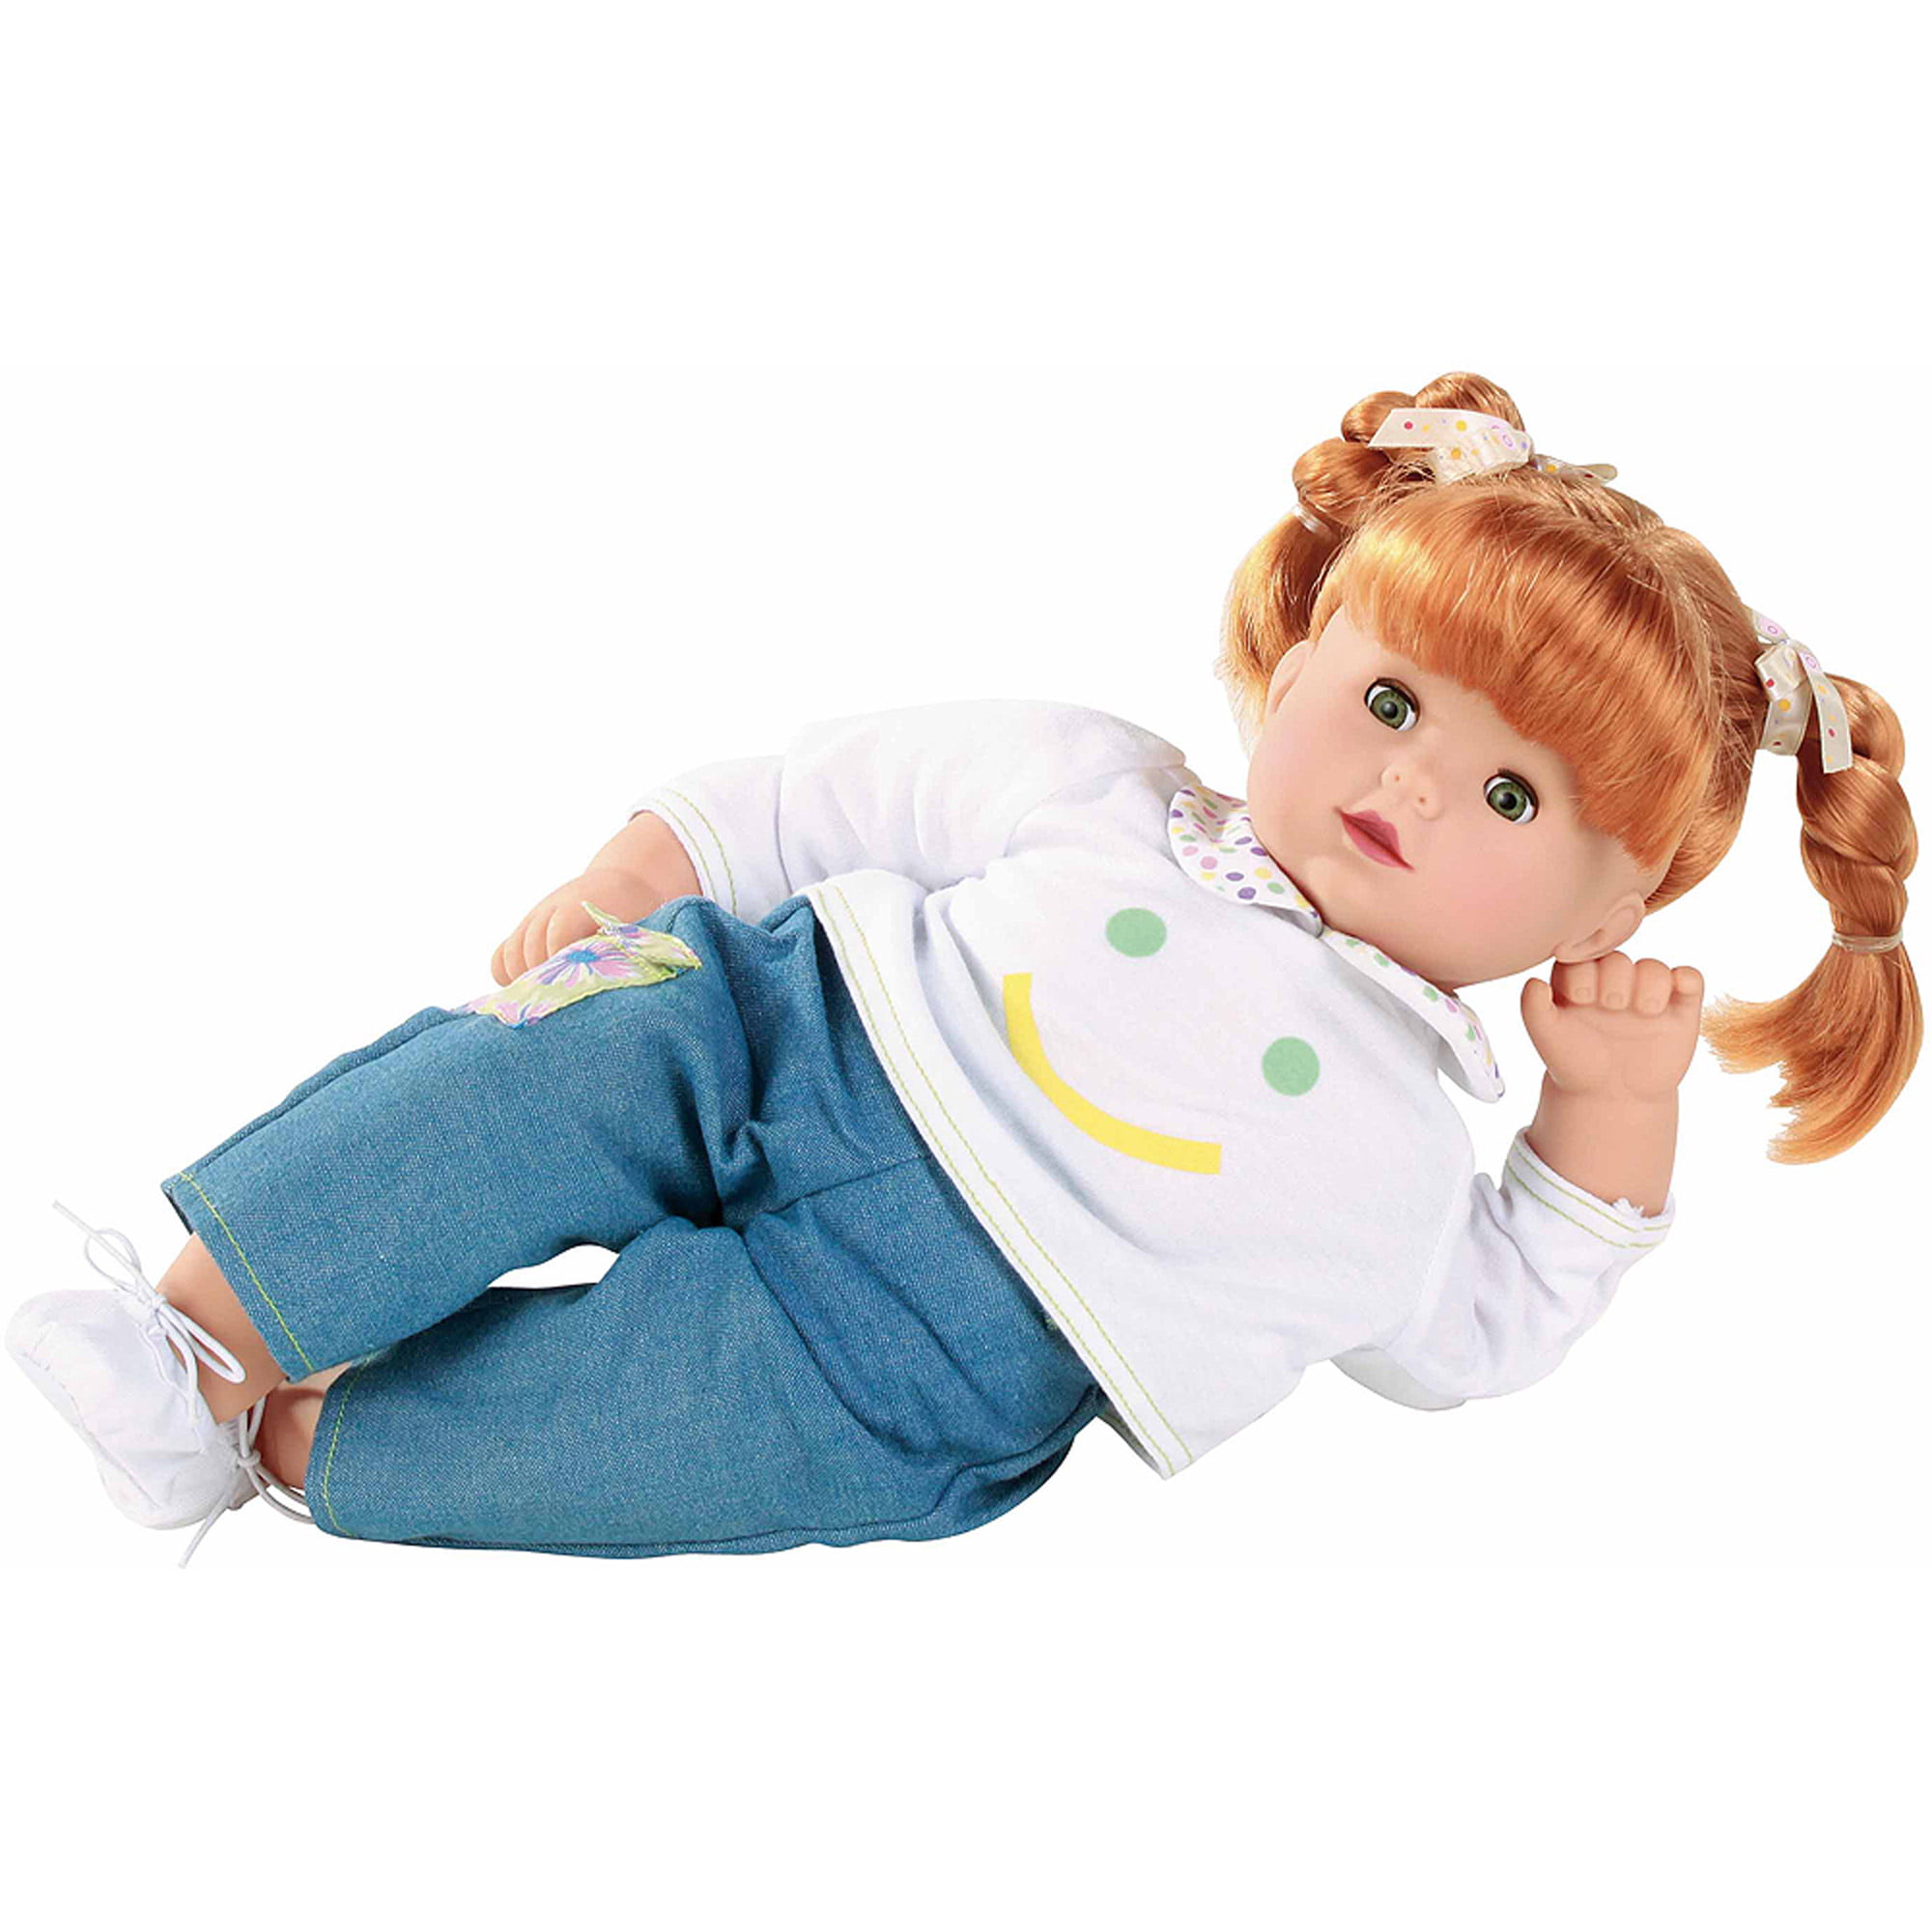 Baby Doll Red Hair And Online - benim.k12.tr 1689288383